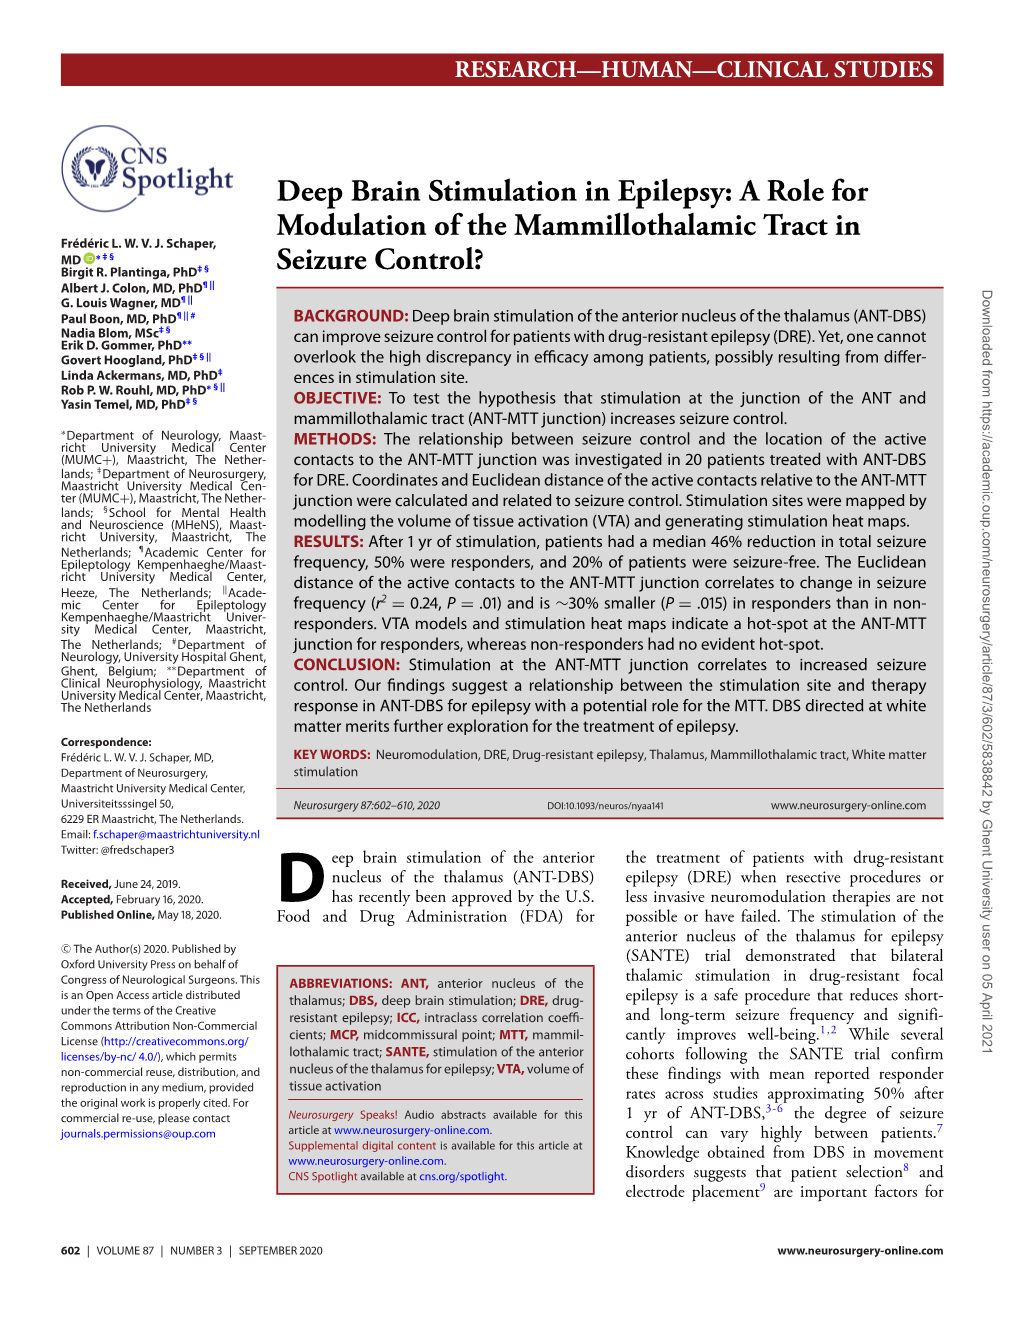 Deep Brain Stimulation in Epilepsy: a Role for Modulation of the Mammillothalamic Tract in Frédéric L